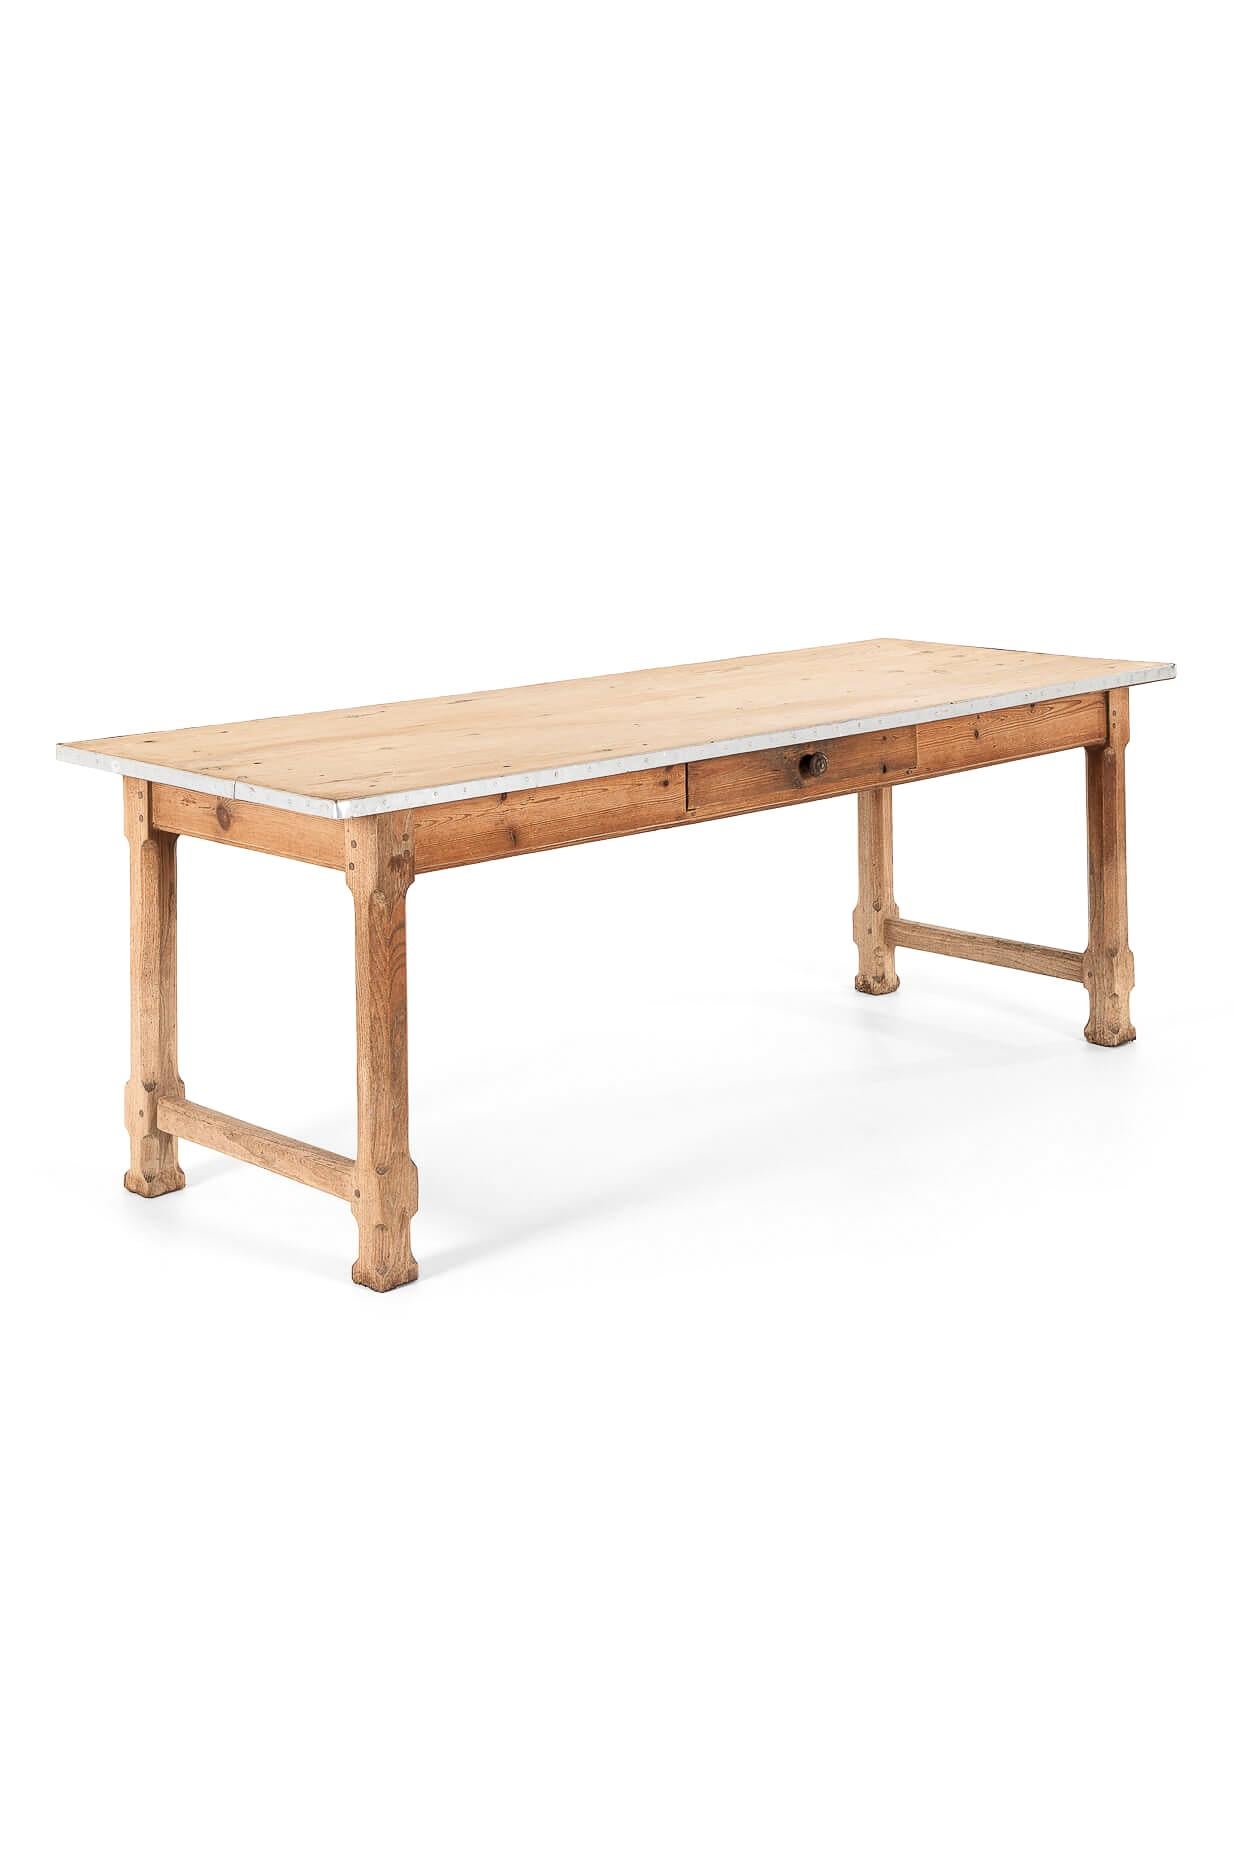 A beautiful provincial farmhouse table with a scrubbed pine top and peripheral aluminium trim.

The fruitwood table base has four carved block legs with cross stretchers, peg and tenon joints and a central frieze drawer.

French, circa